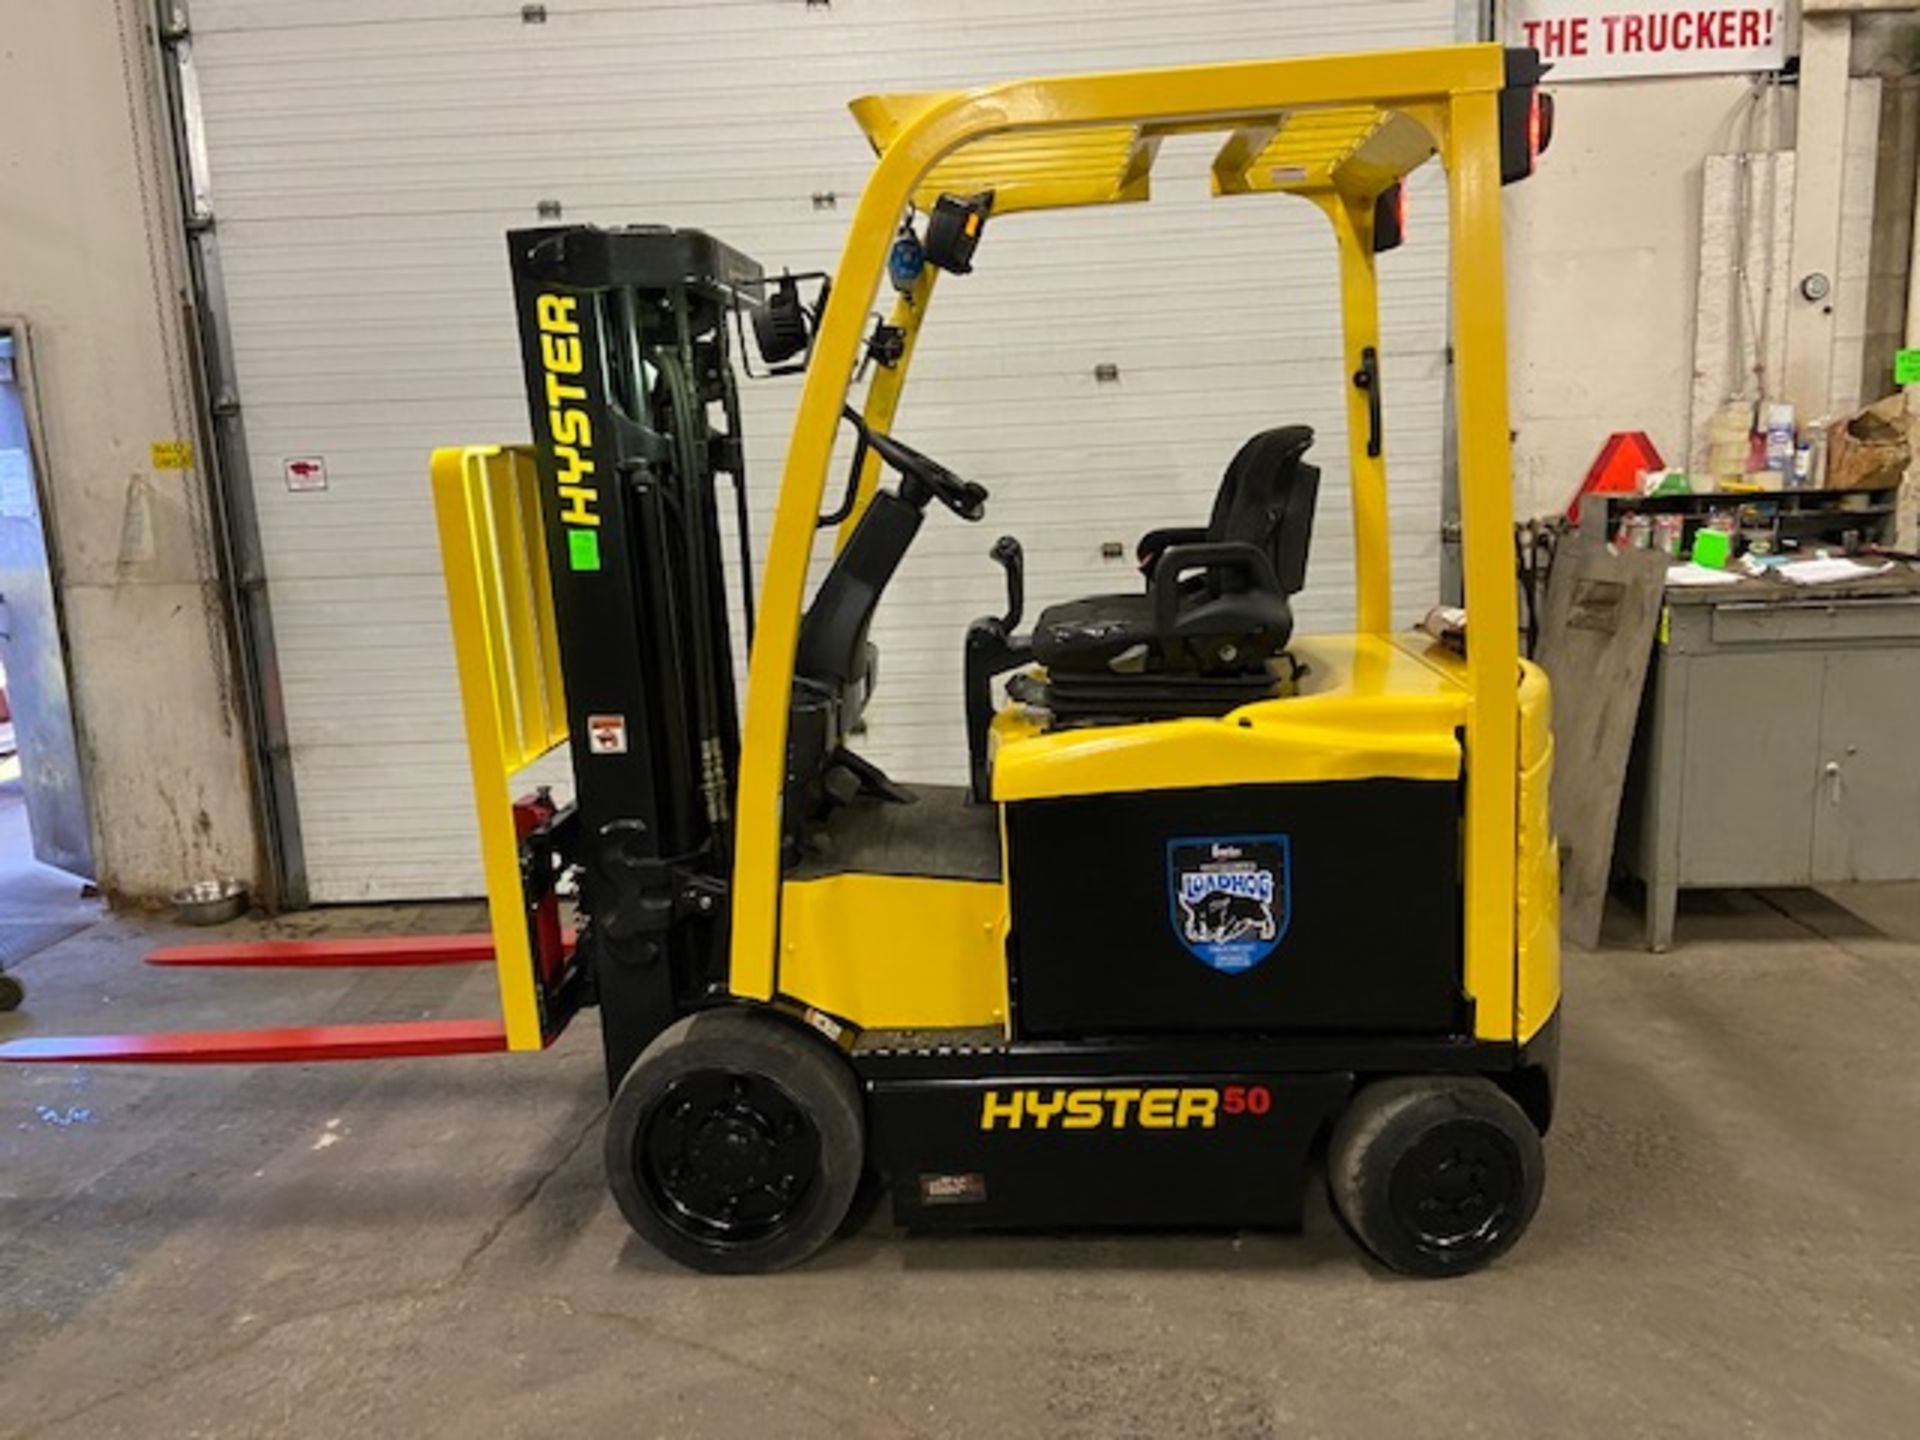 FREE CUSTOMS - 2015 Hyster 5000lbs Capacity Forklift Electric with 3-STAGE MAST with sideshift